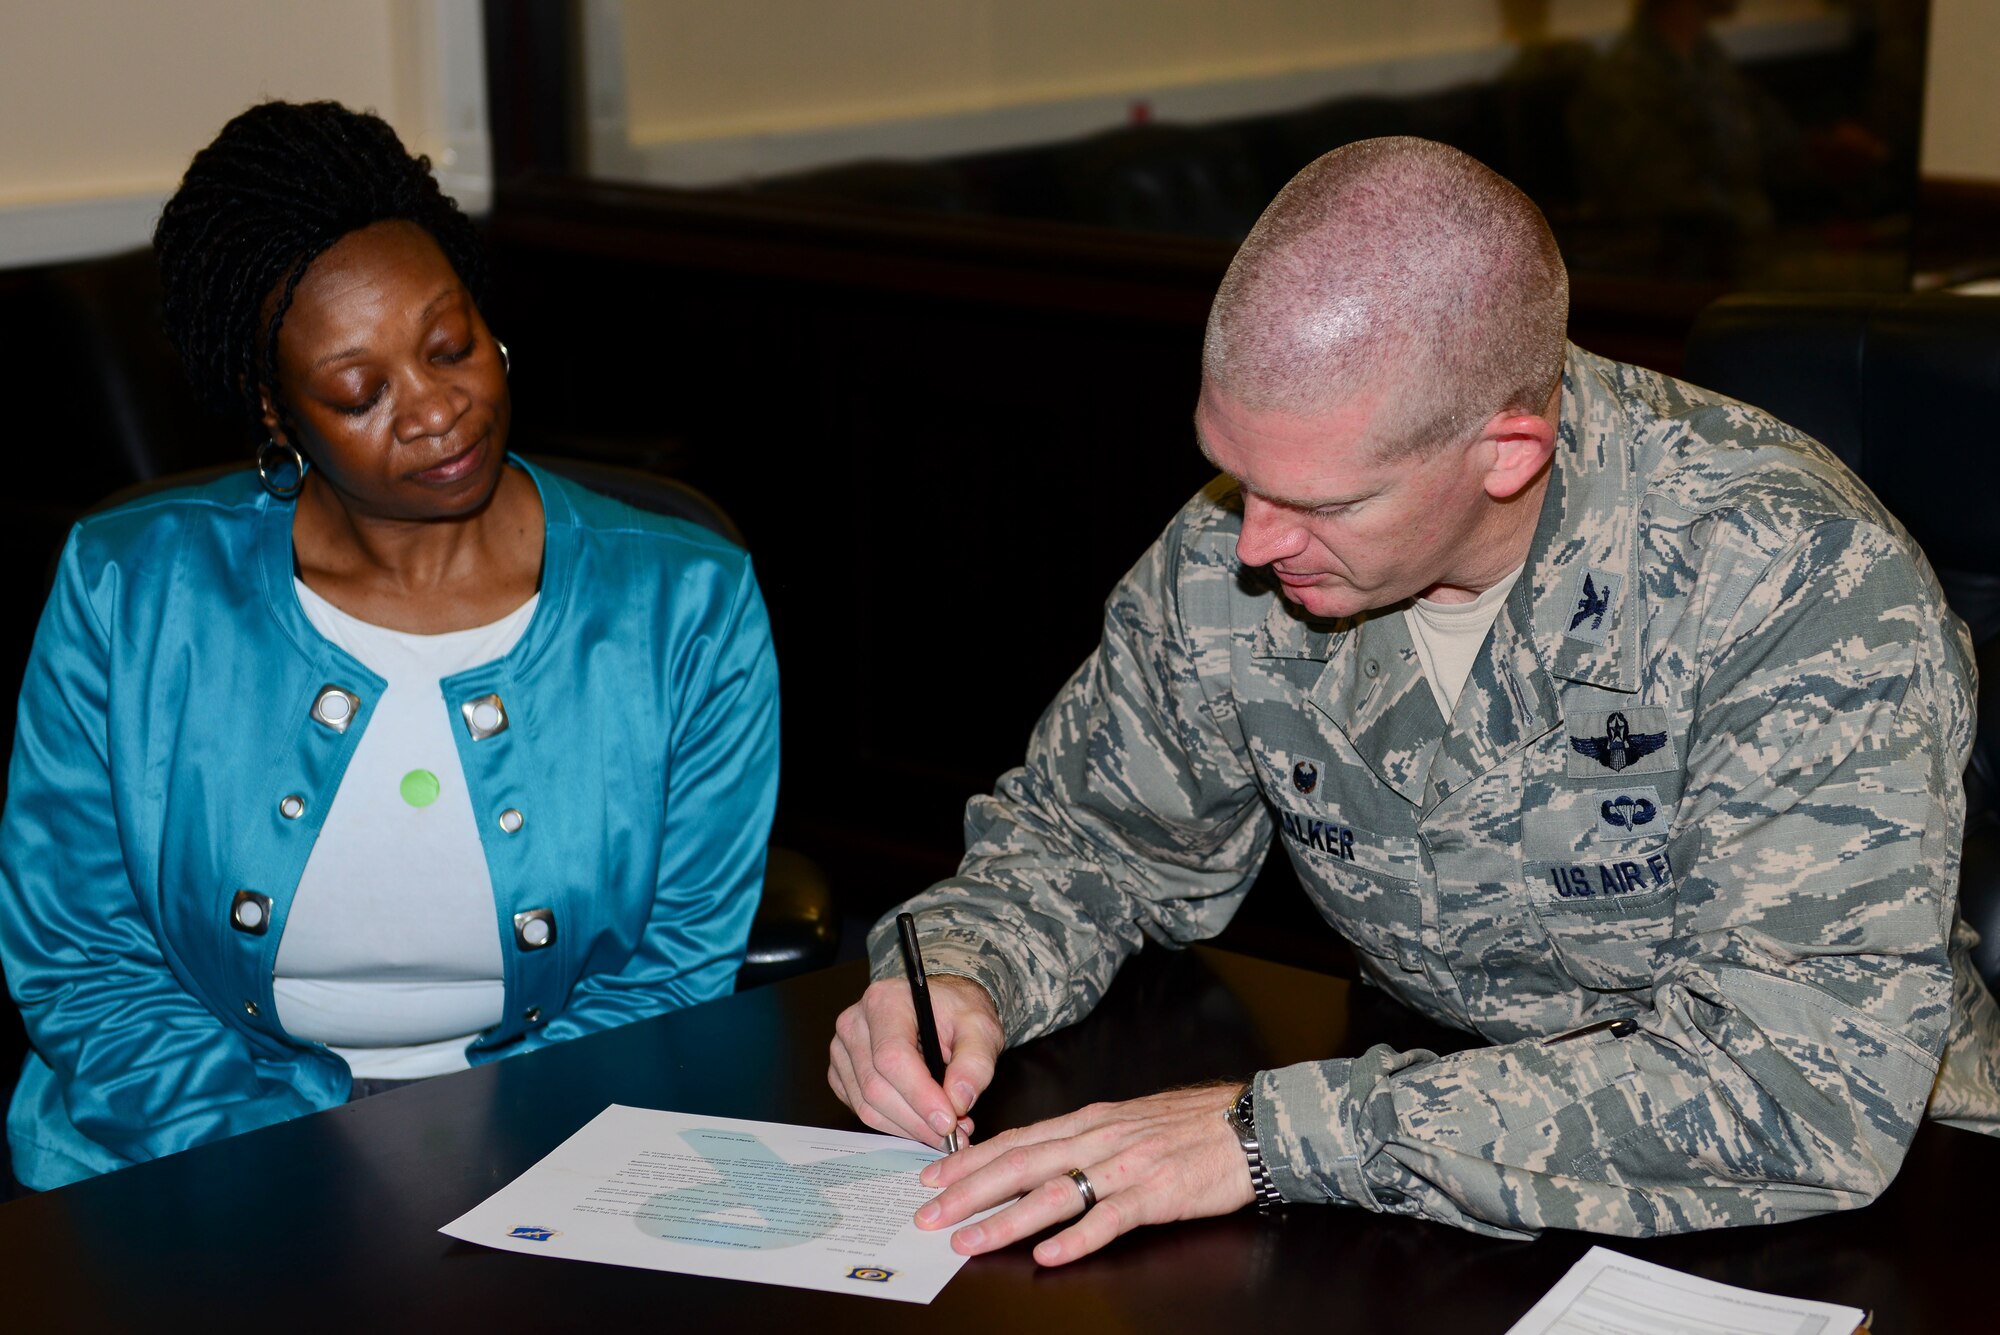 Shelia Bacon, 39th Air Base Wing sexual assault prevention and response (SAPR) victim advocate, oversees U.S. Air Force Col. John Walker, 39th ABW commander, as he signs the SAPR proclamation April 7, 2016, at Incirlik Air Base, Turkey. Bacon was selected as the U.S. Air Forces in Europe and Air Forces Africa 2016 National Image, Inc. Civilian Meritorious Service Award winner. (U.S. Air Force photo by Staff Sgt. Caleb Pierce/Released)